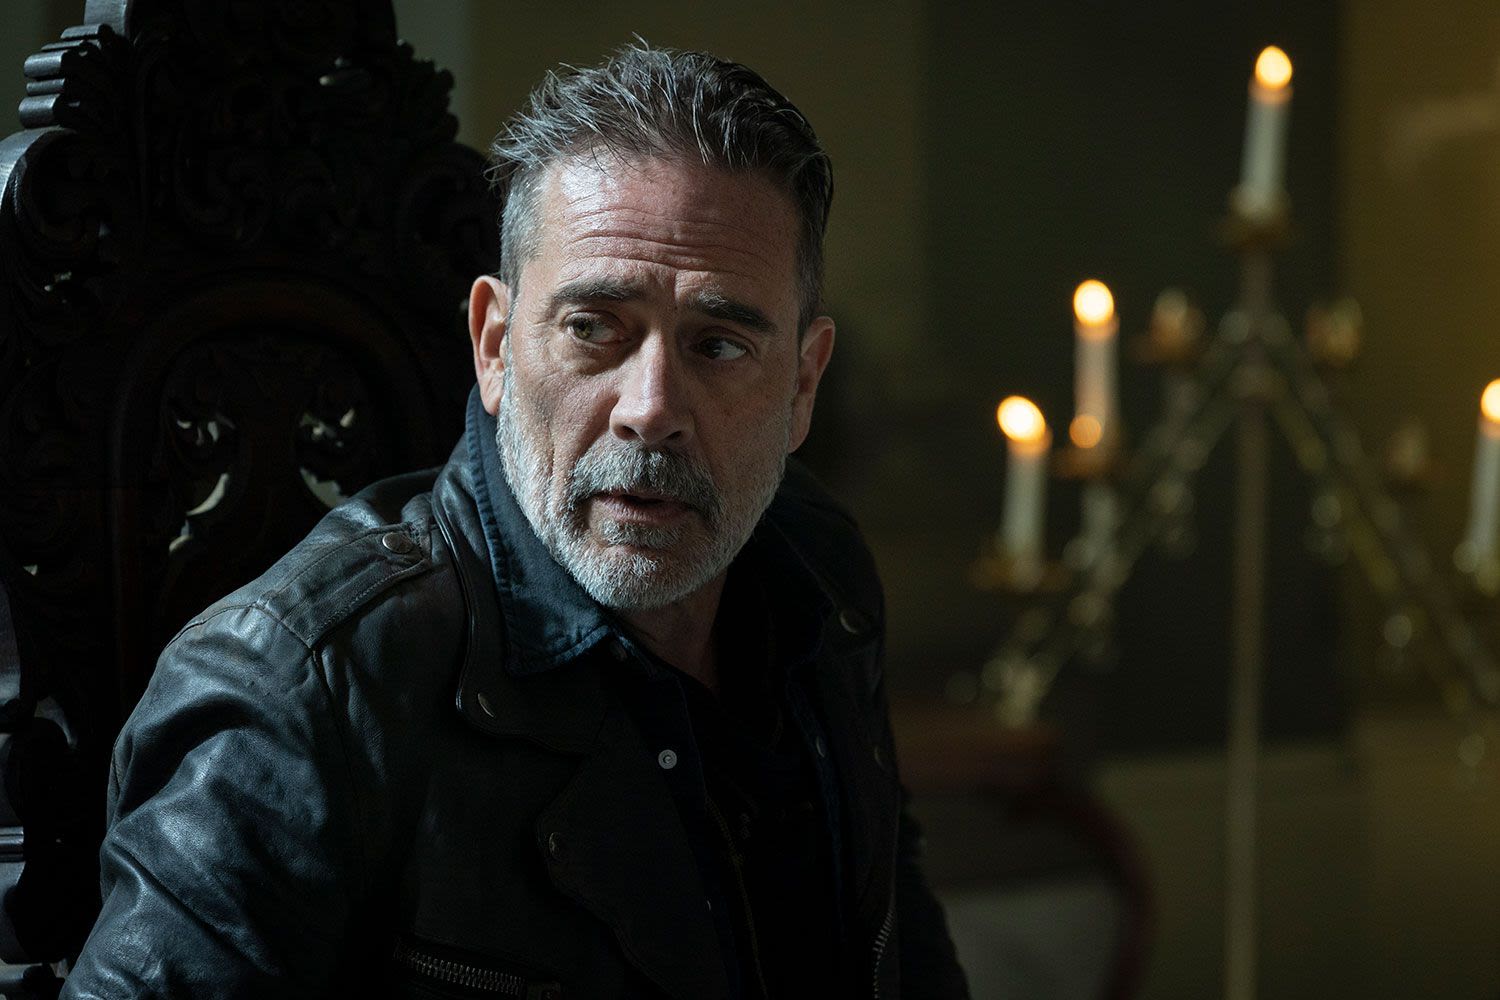 'The Walking Dead: Dead City' Teaser Sees the Terrifying Return of Jeffrey Dean Morgan's Whistle and Bat Lucille